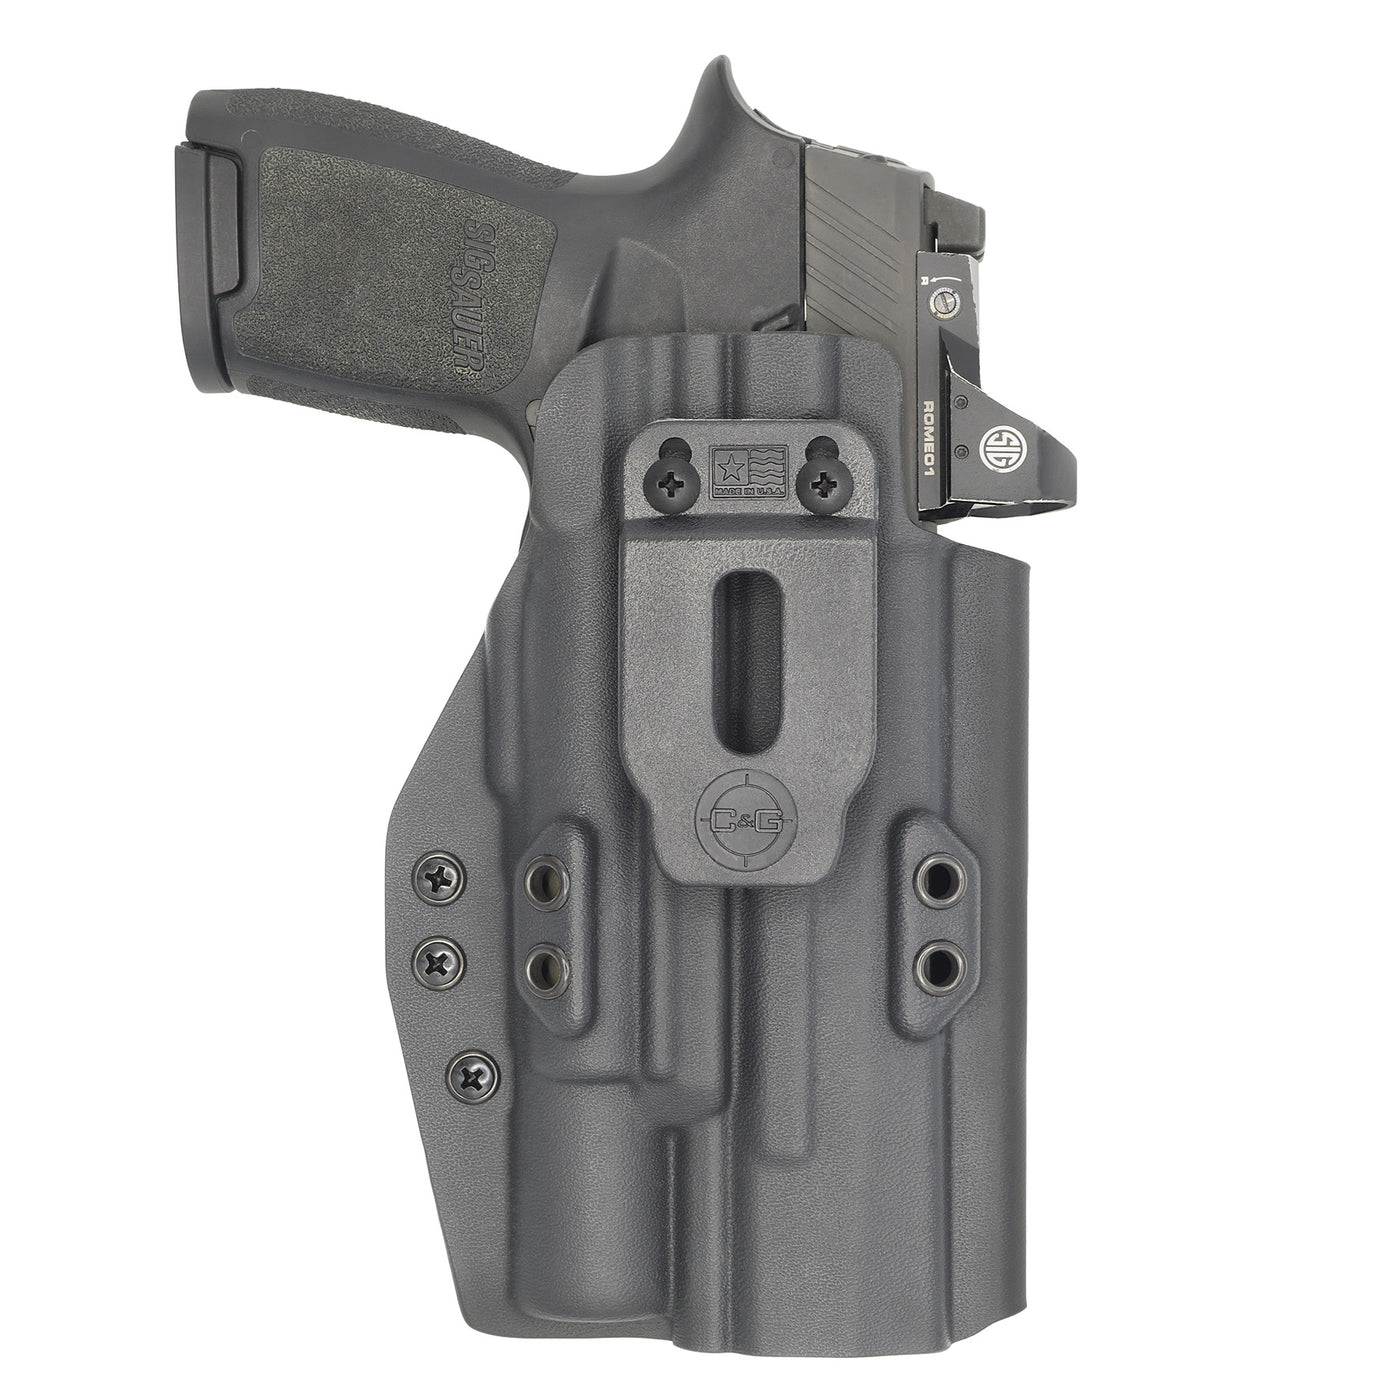 C&G Holsters Quickship IWB Tactical SIG P320/X5 Surefire X300 holster in holstered position